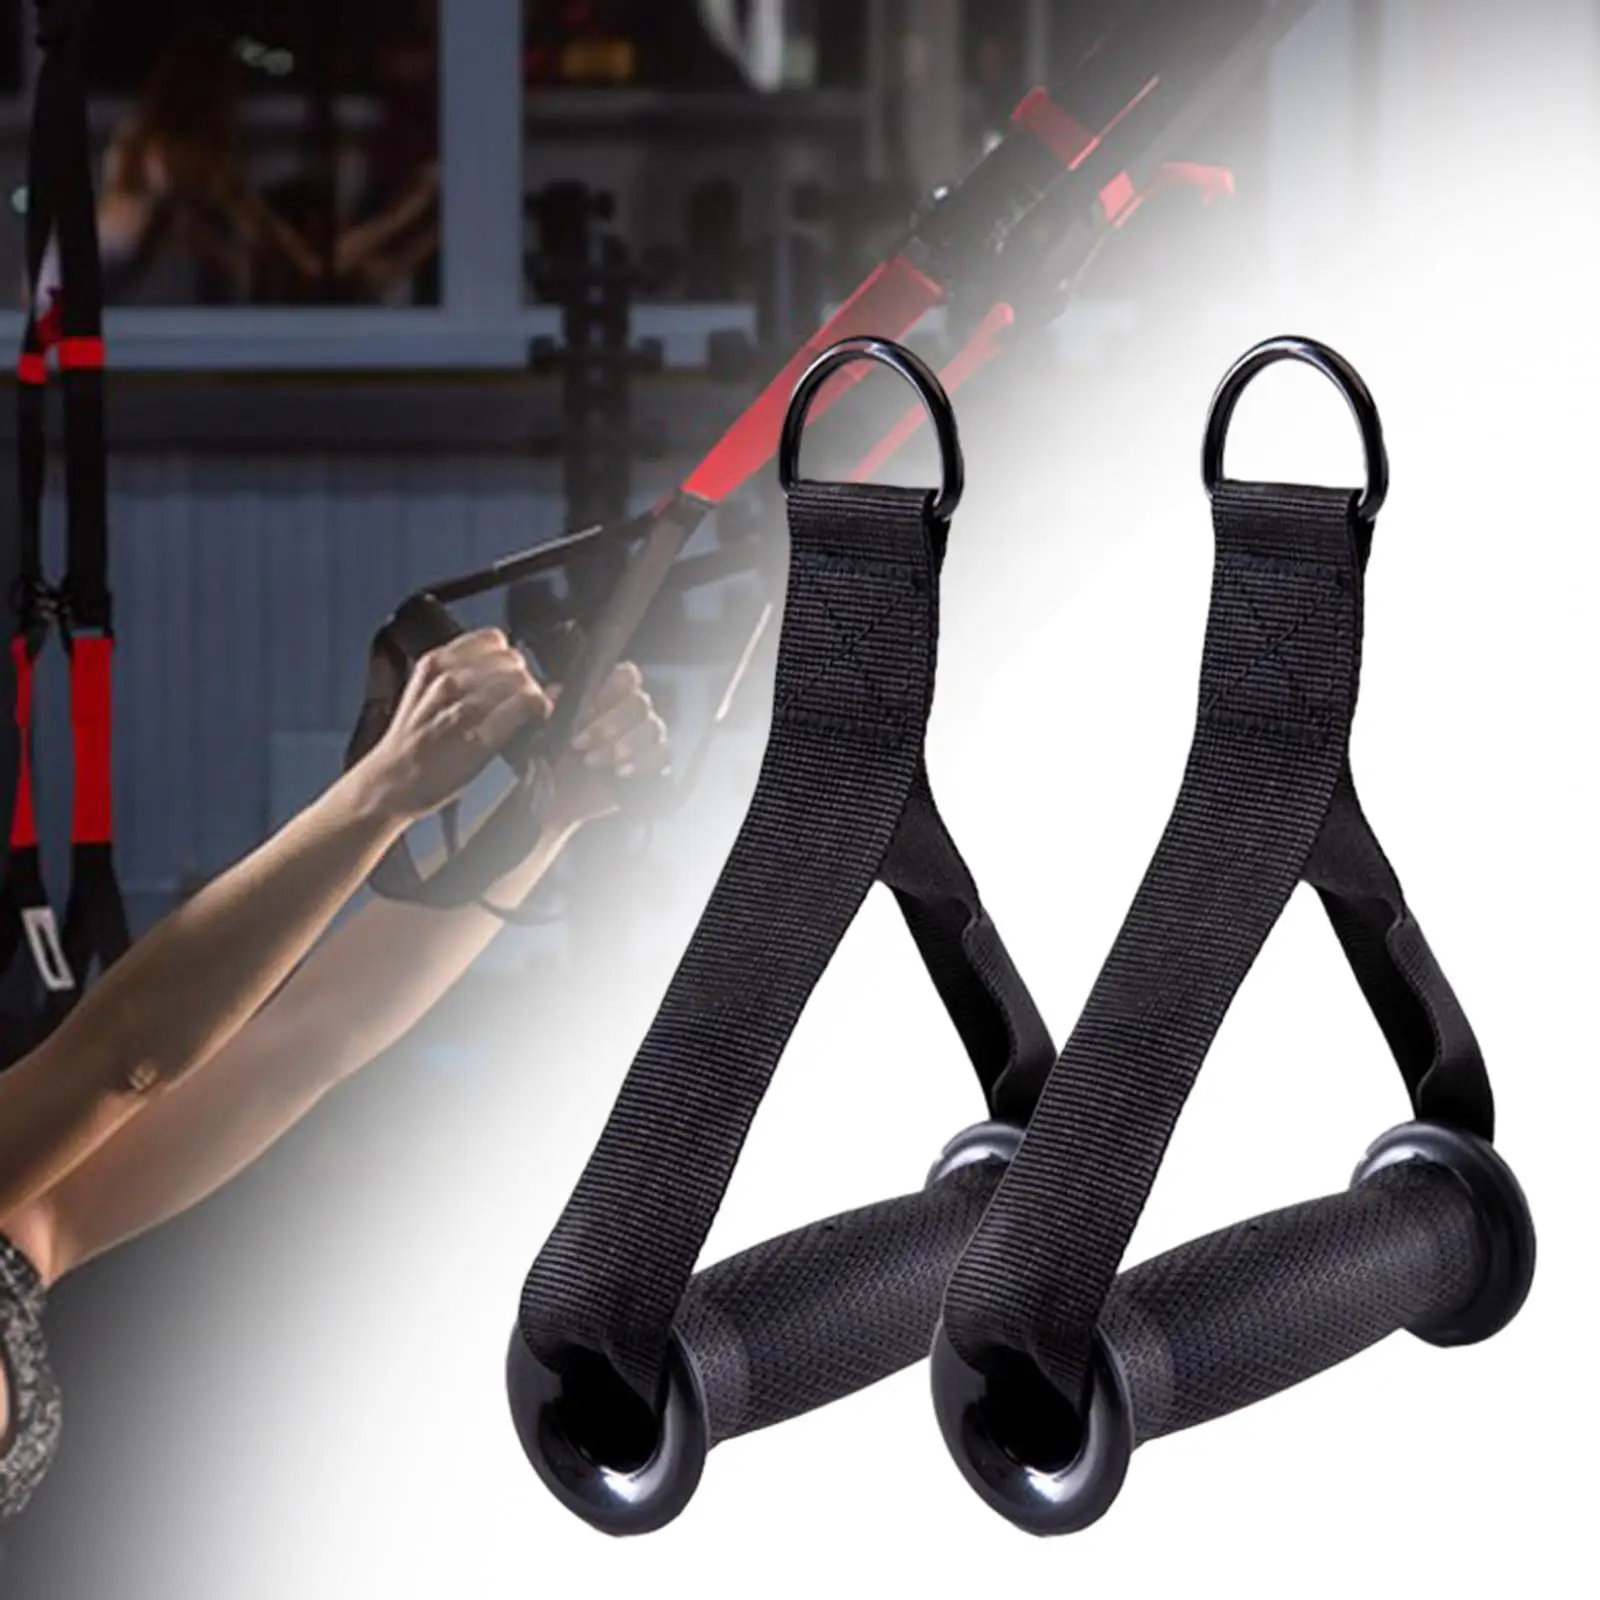 Exercise Handles Machine Attachments Resistance Band Handles for Fitness Equipment Working Out Yoga Pilates Strength Training